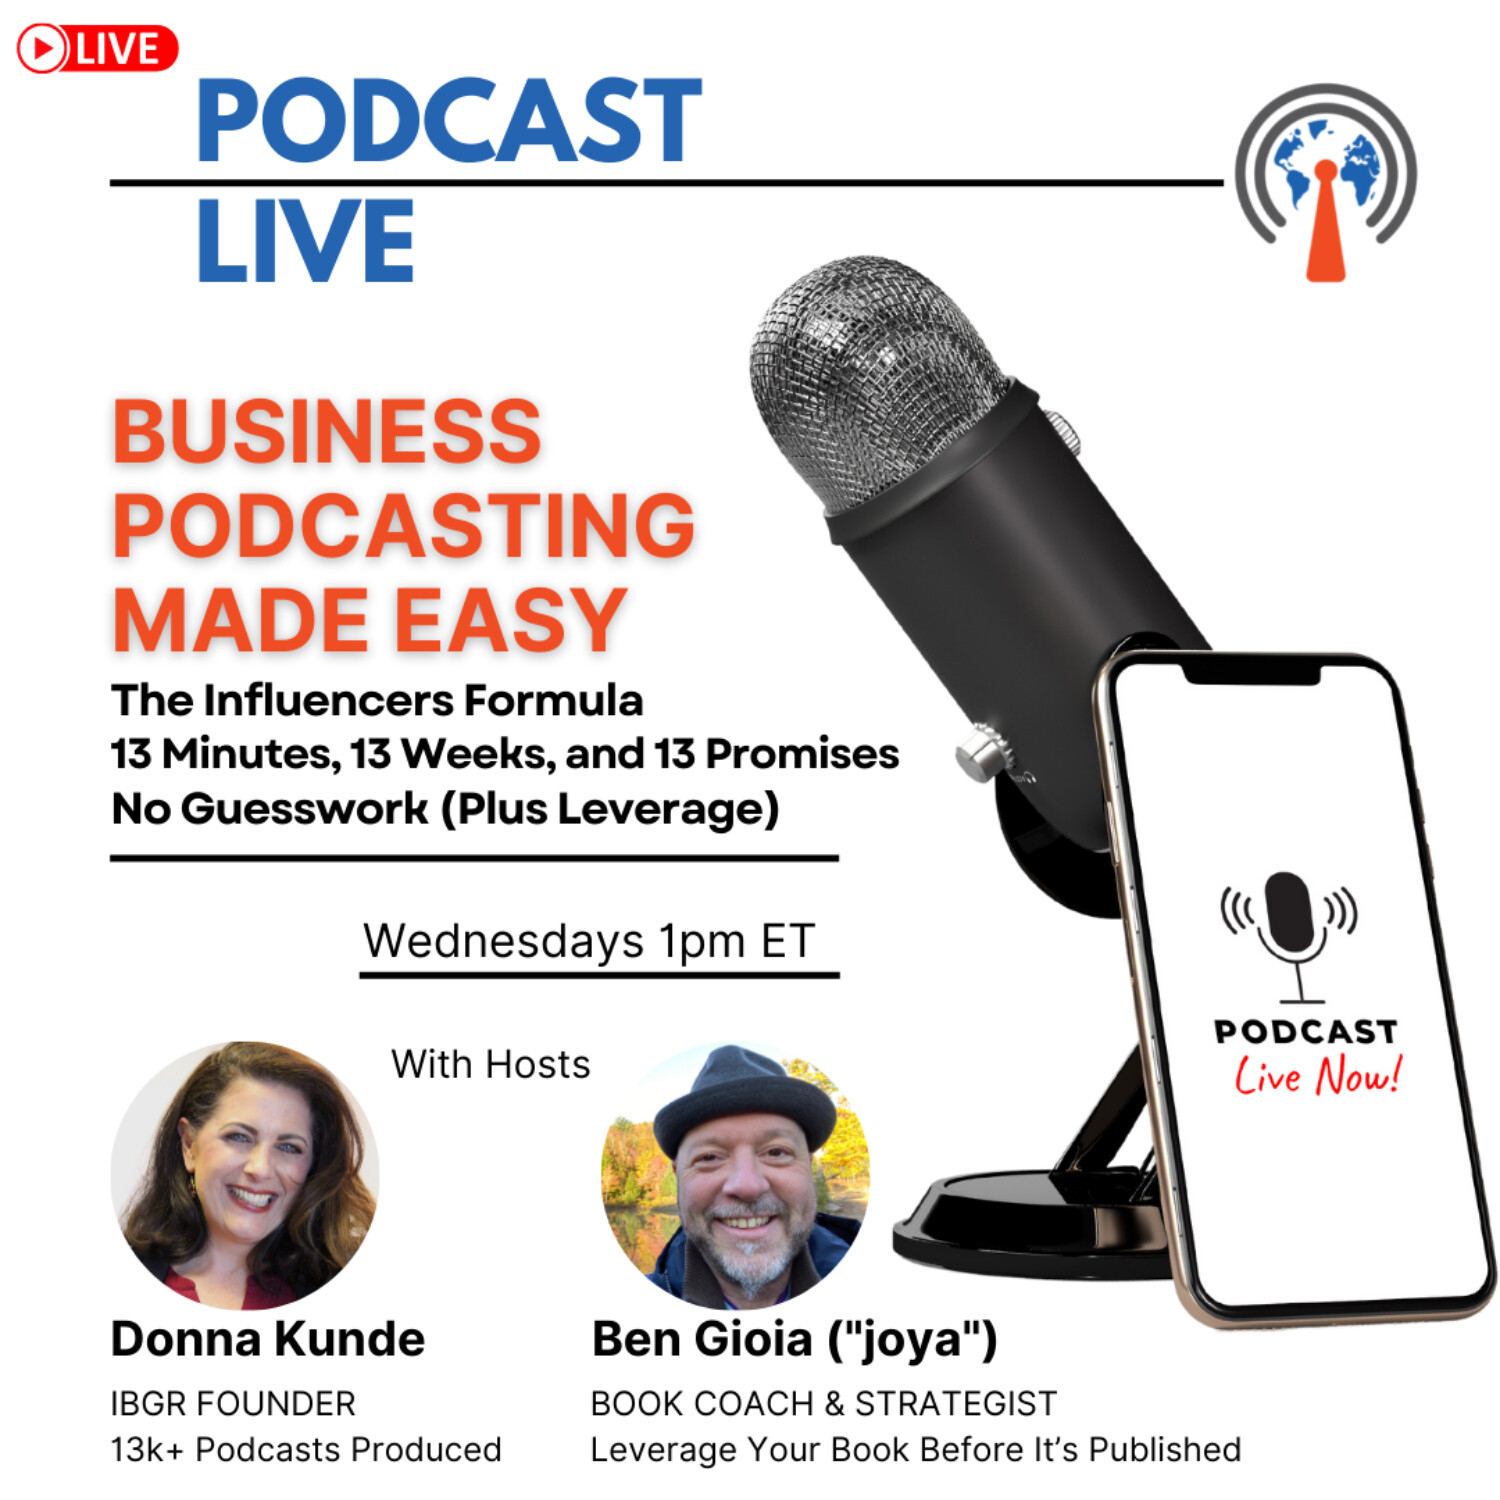 Artwork for podcast Business Podcasting Made Easy with The Influencers Formula